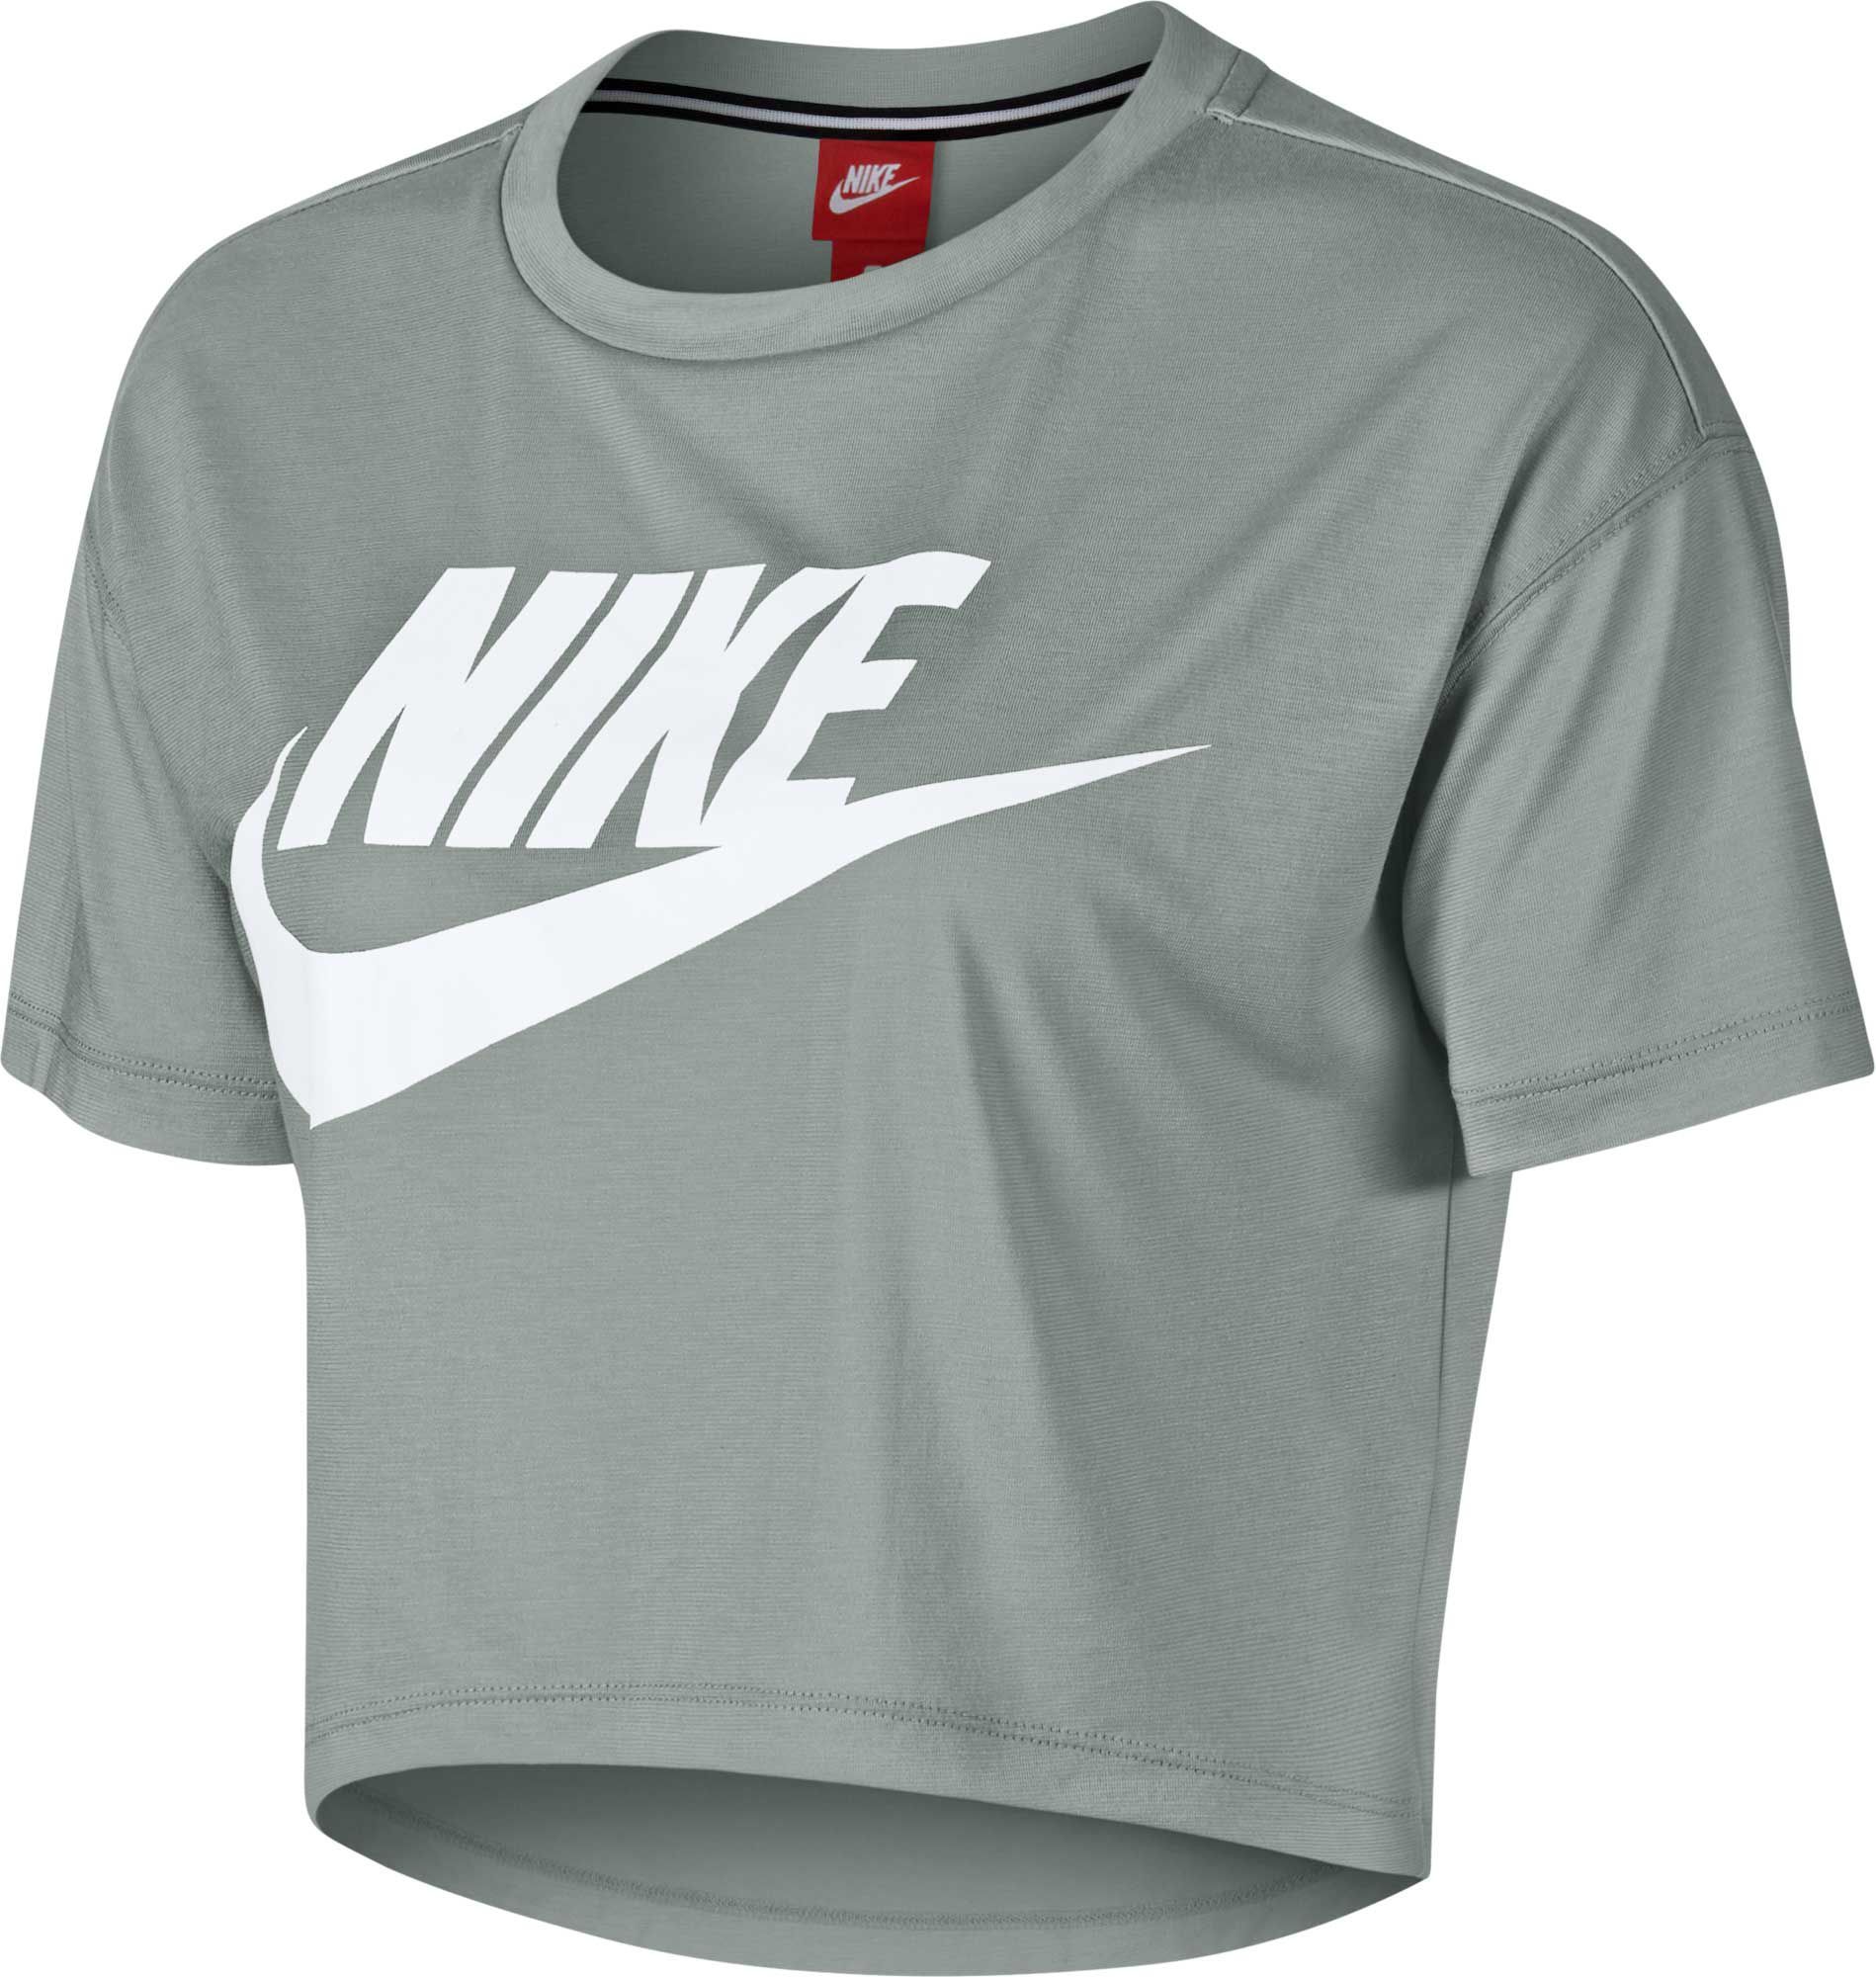 Nike Women's Essential Cropped T-Shirt, Size: XL, Light Pumice/White | Dick's Sporting Goods